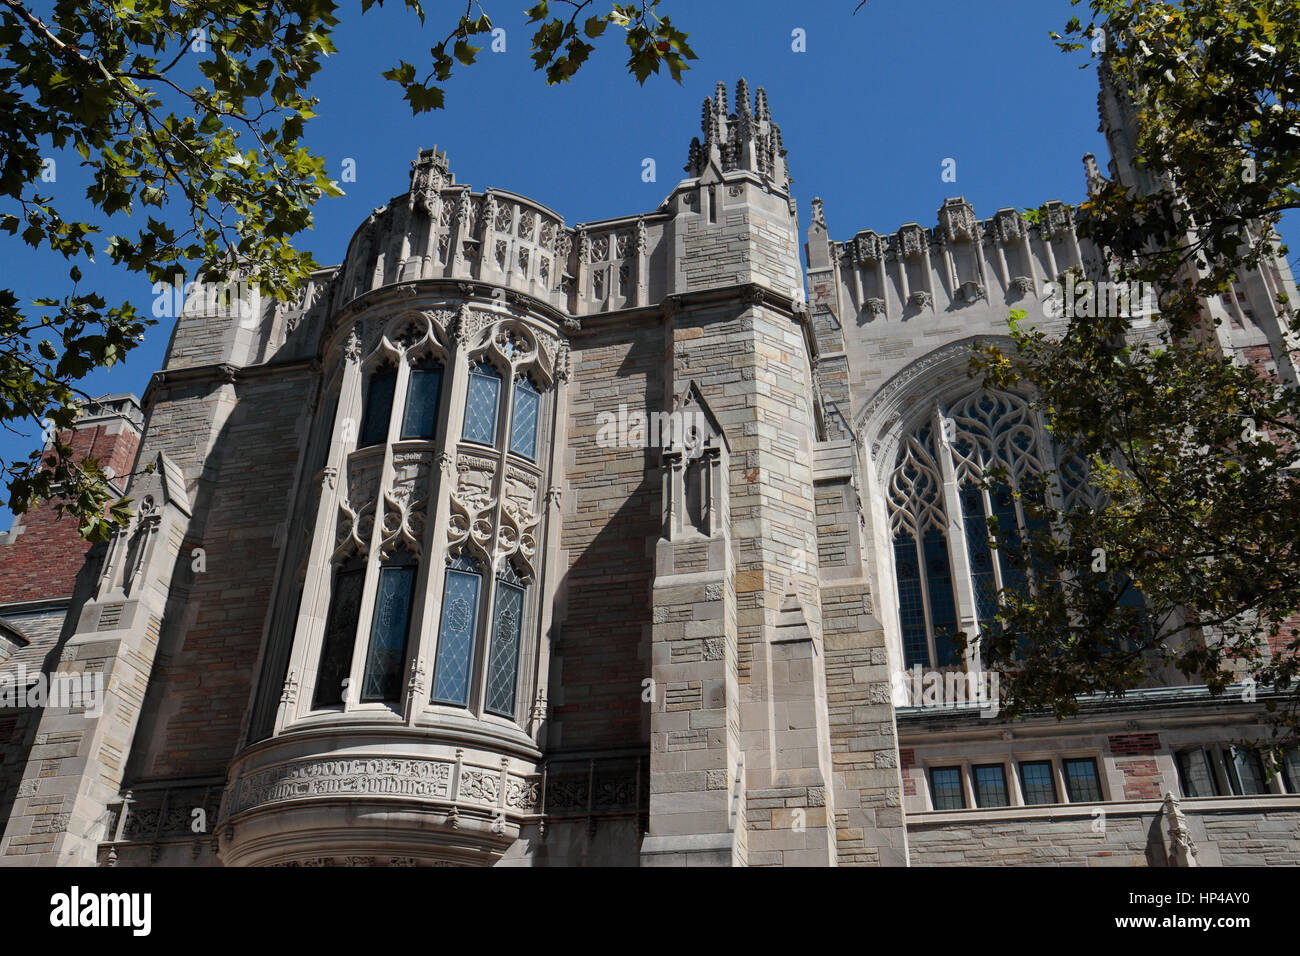 Sterling Law Building, nach Hause zu Yale Law School, Yale University, New Haven, Connecticut, USA. Stockfoto